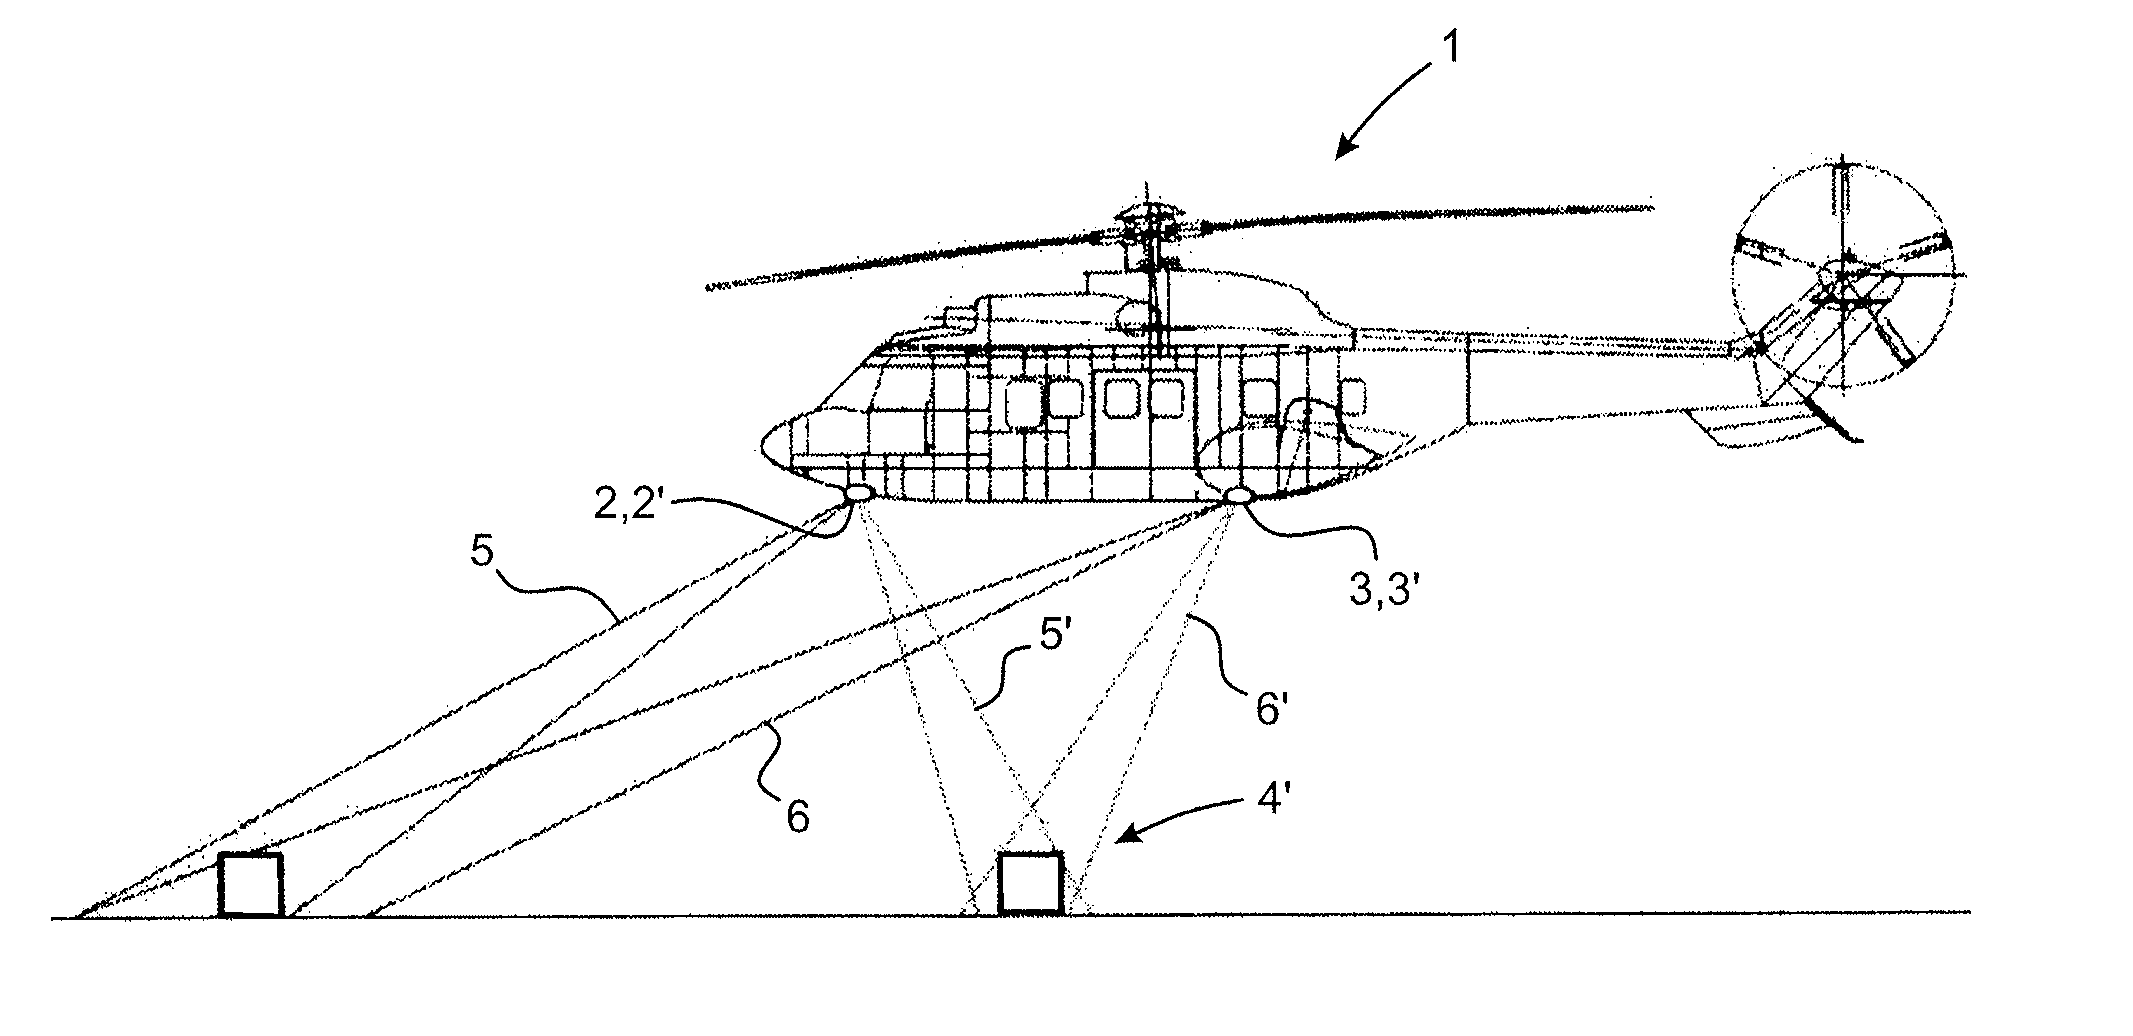 Rotorcraft having lighting equipment with a plurality of headlights operated for landing, winching, and searching